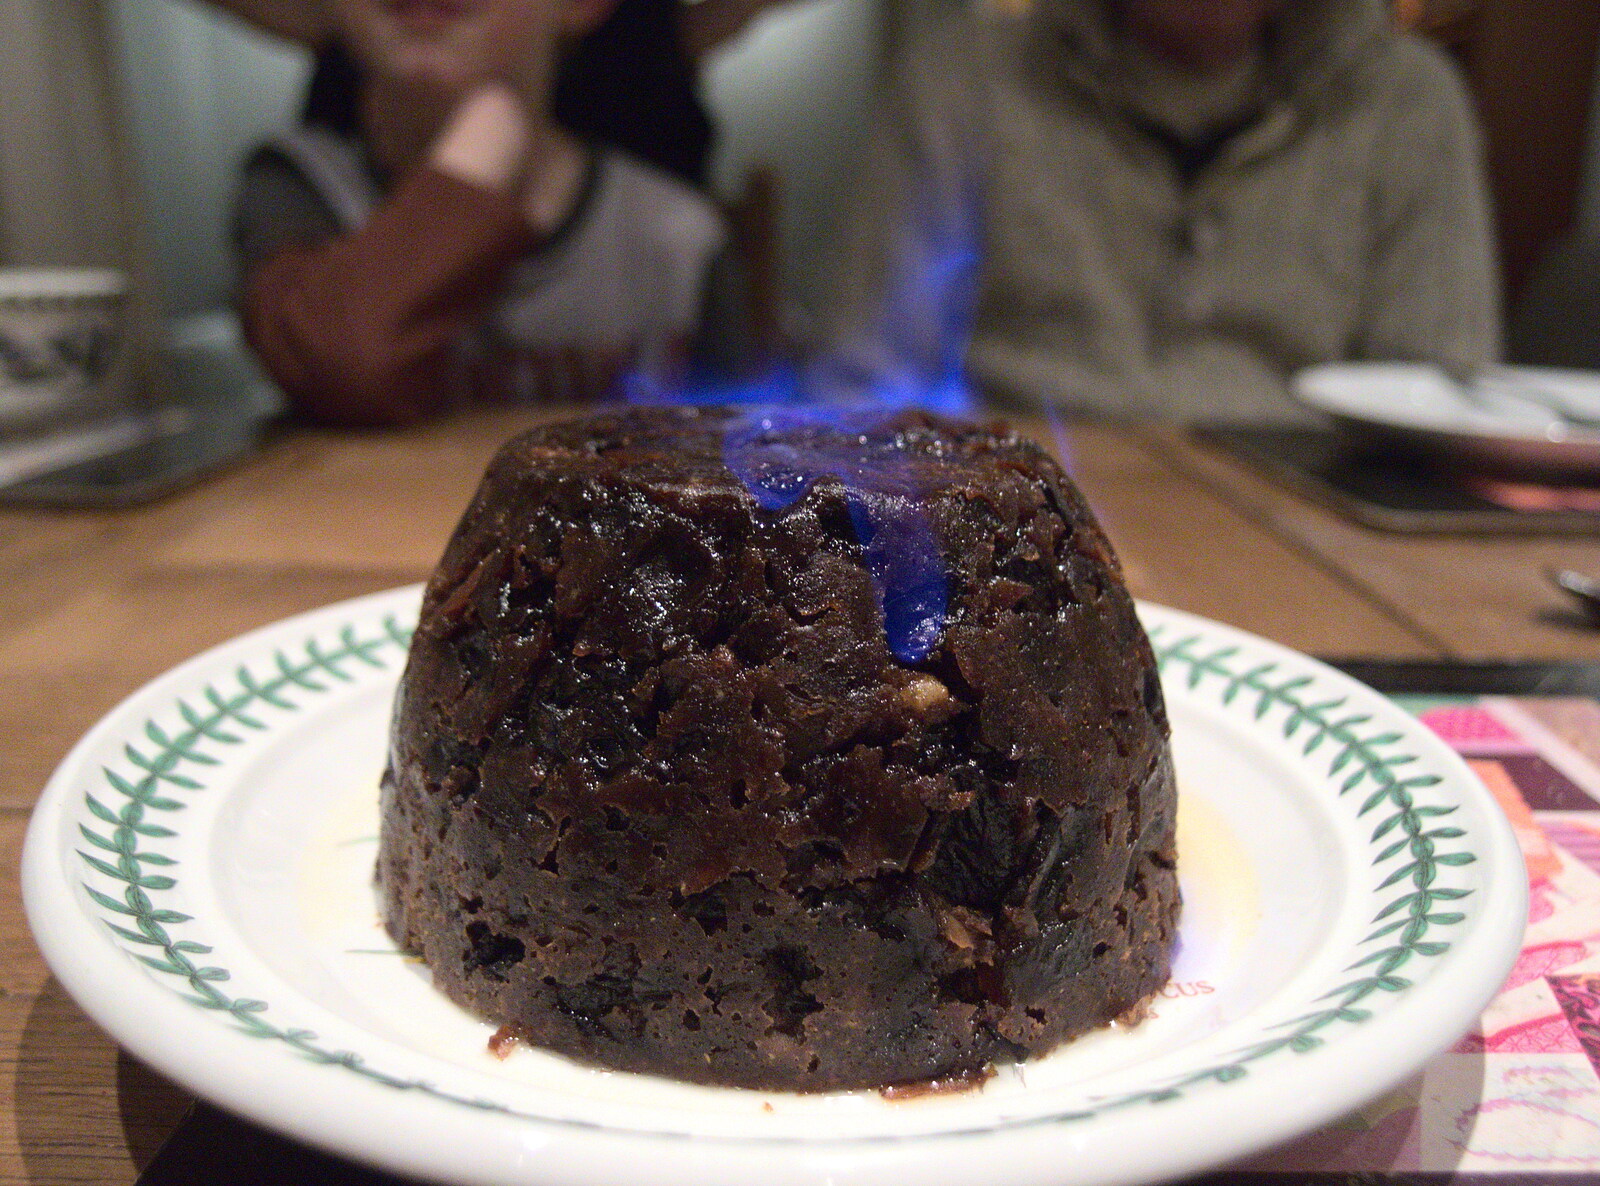 We eat a very late bit of Christmas Pudding from A Snowy January Miscellany, Eye, Suffolk - 15th January 2017